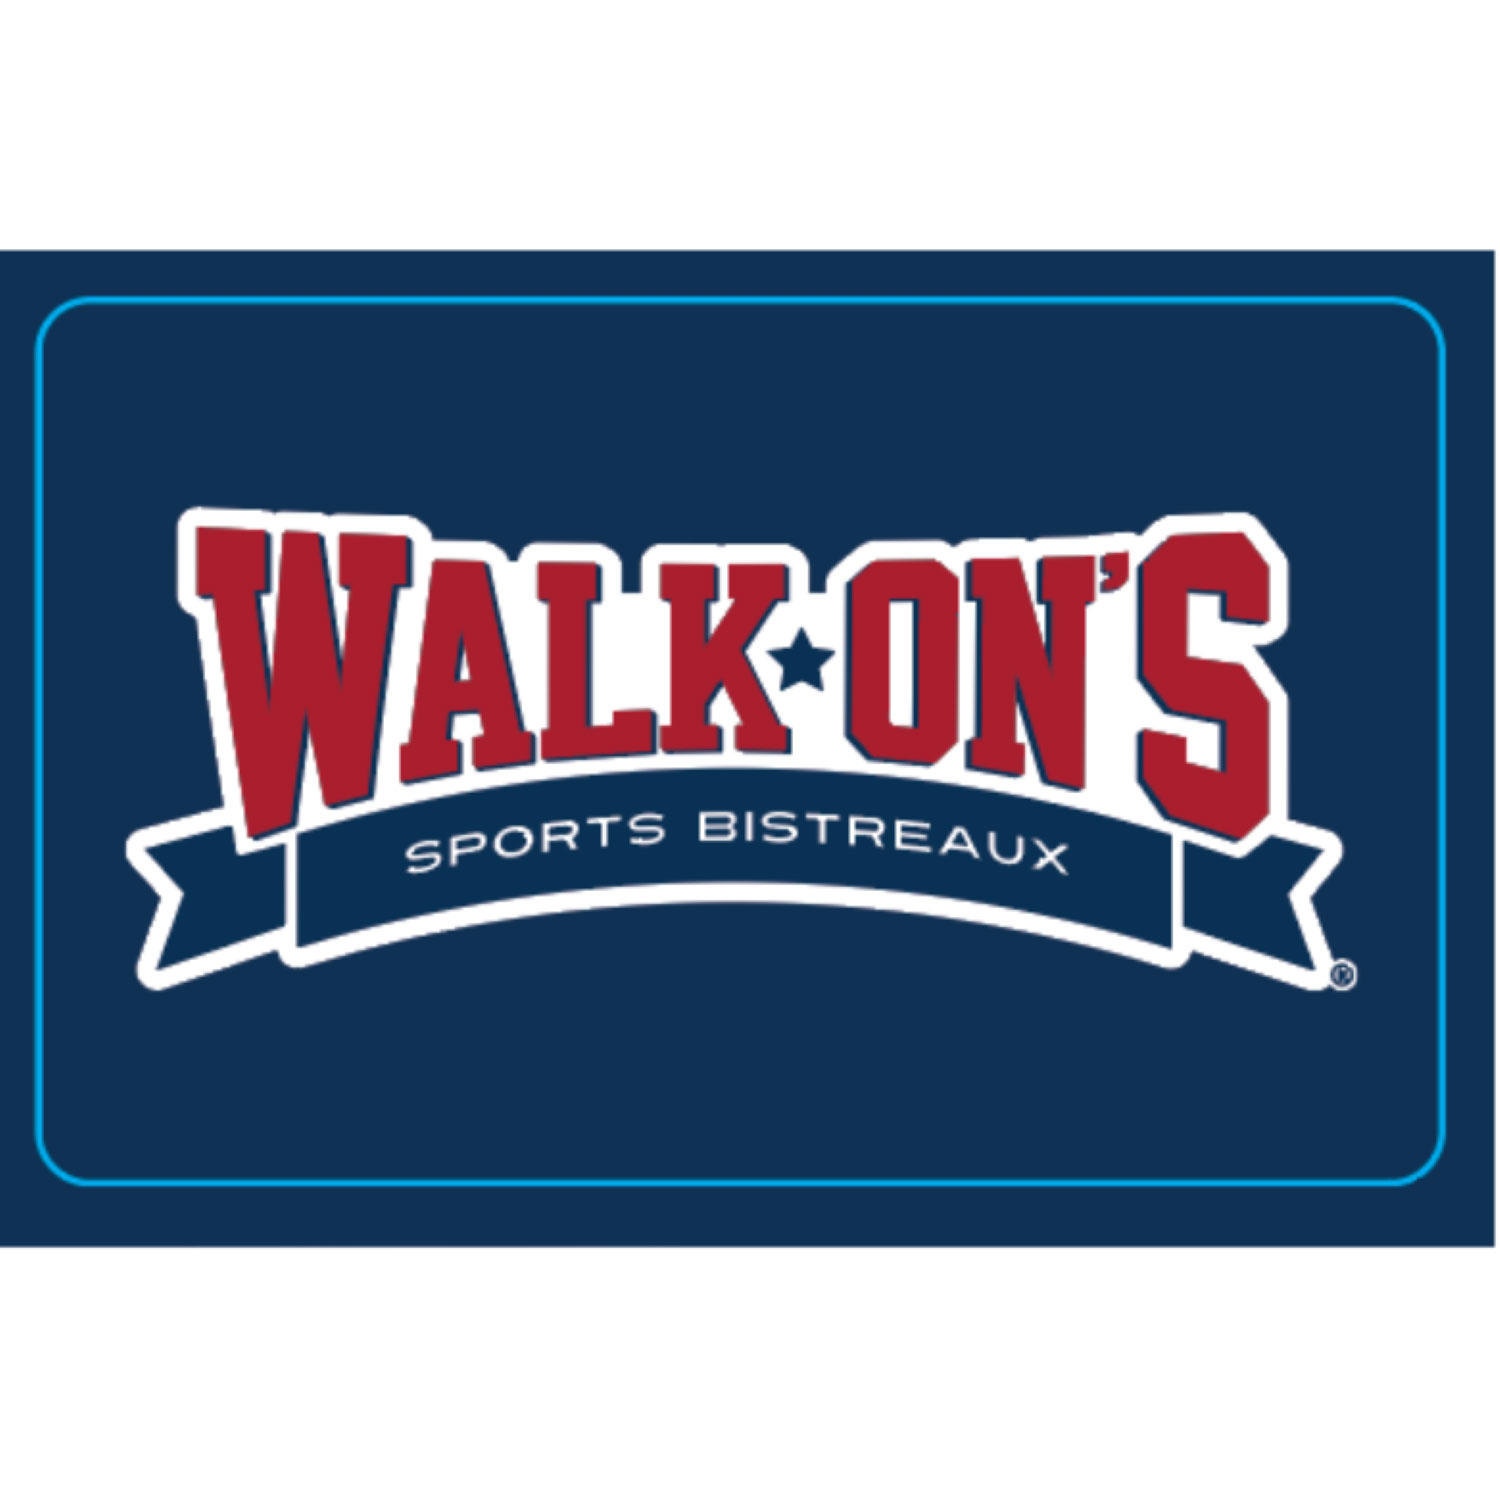 Walk On's $50 (2 x $25) Value Gift Cards